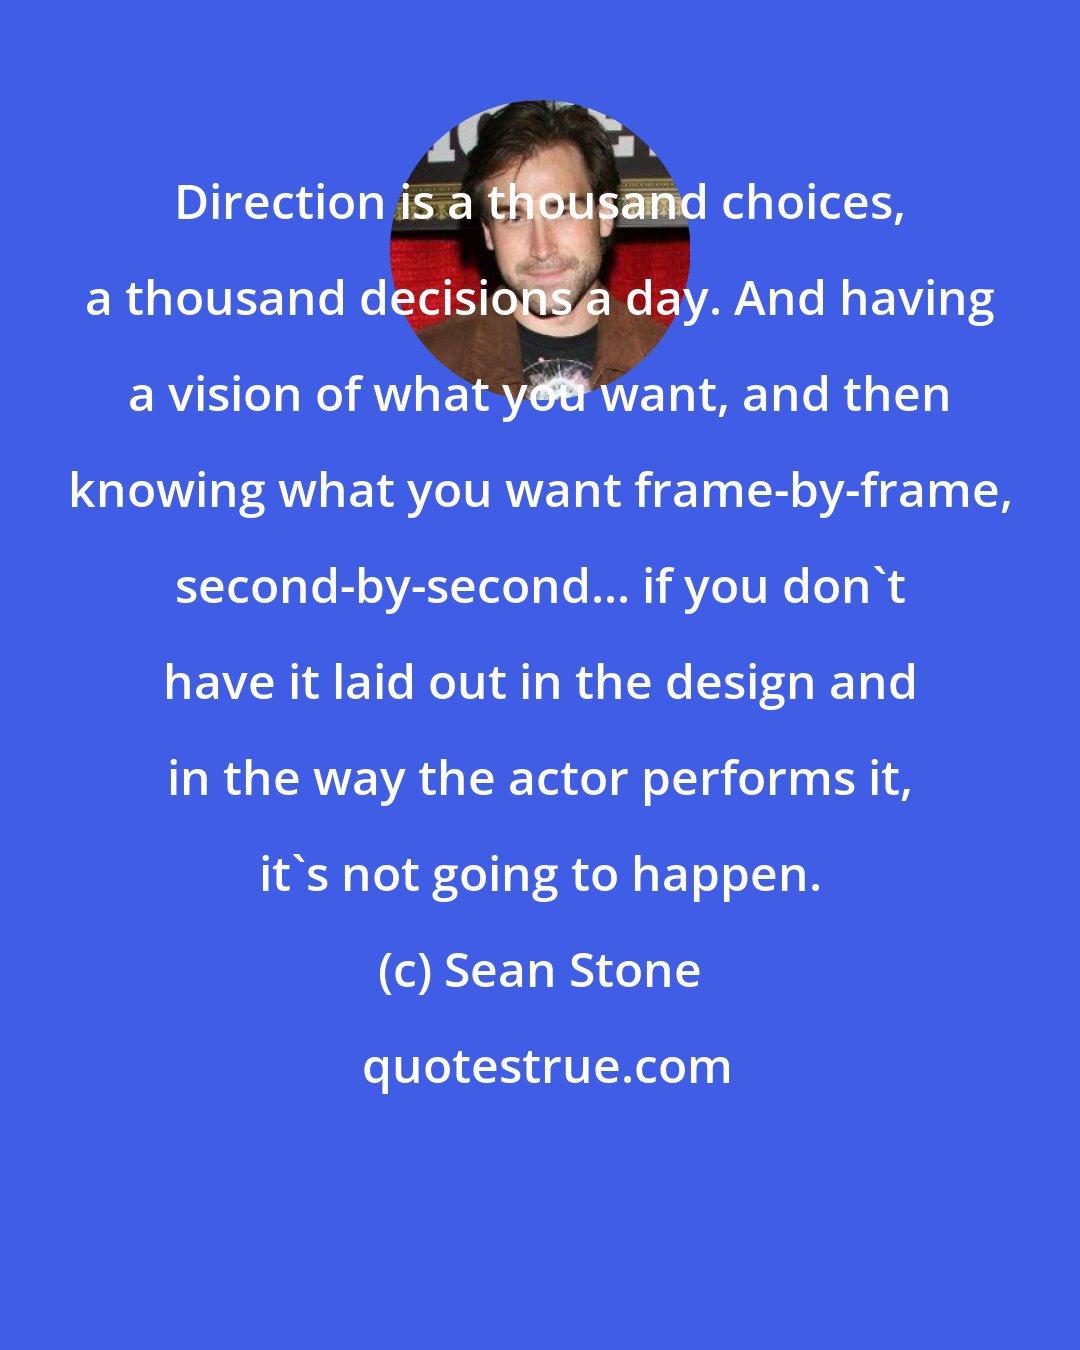 Sean Stone: Direction is a thousand choices, a thousand decisions a day. And having a vision of what you want, and then knowing what you want frame-by-frame, second-by-second... if you don't have it laid out in the design and in the way the actor performs it, it's not going to happen.